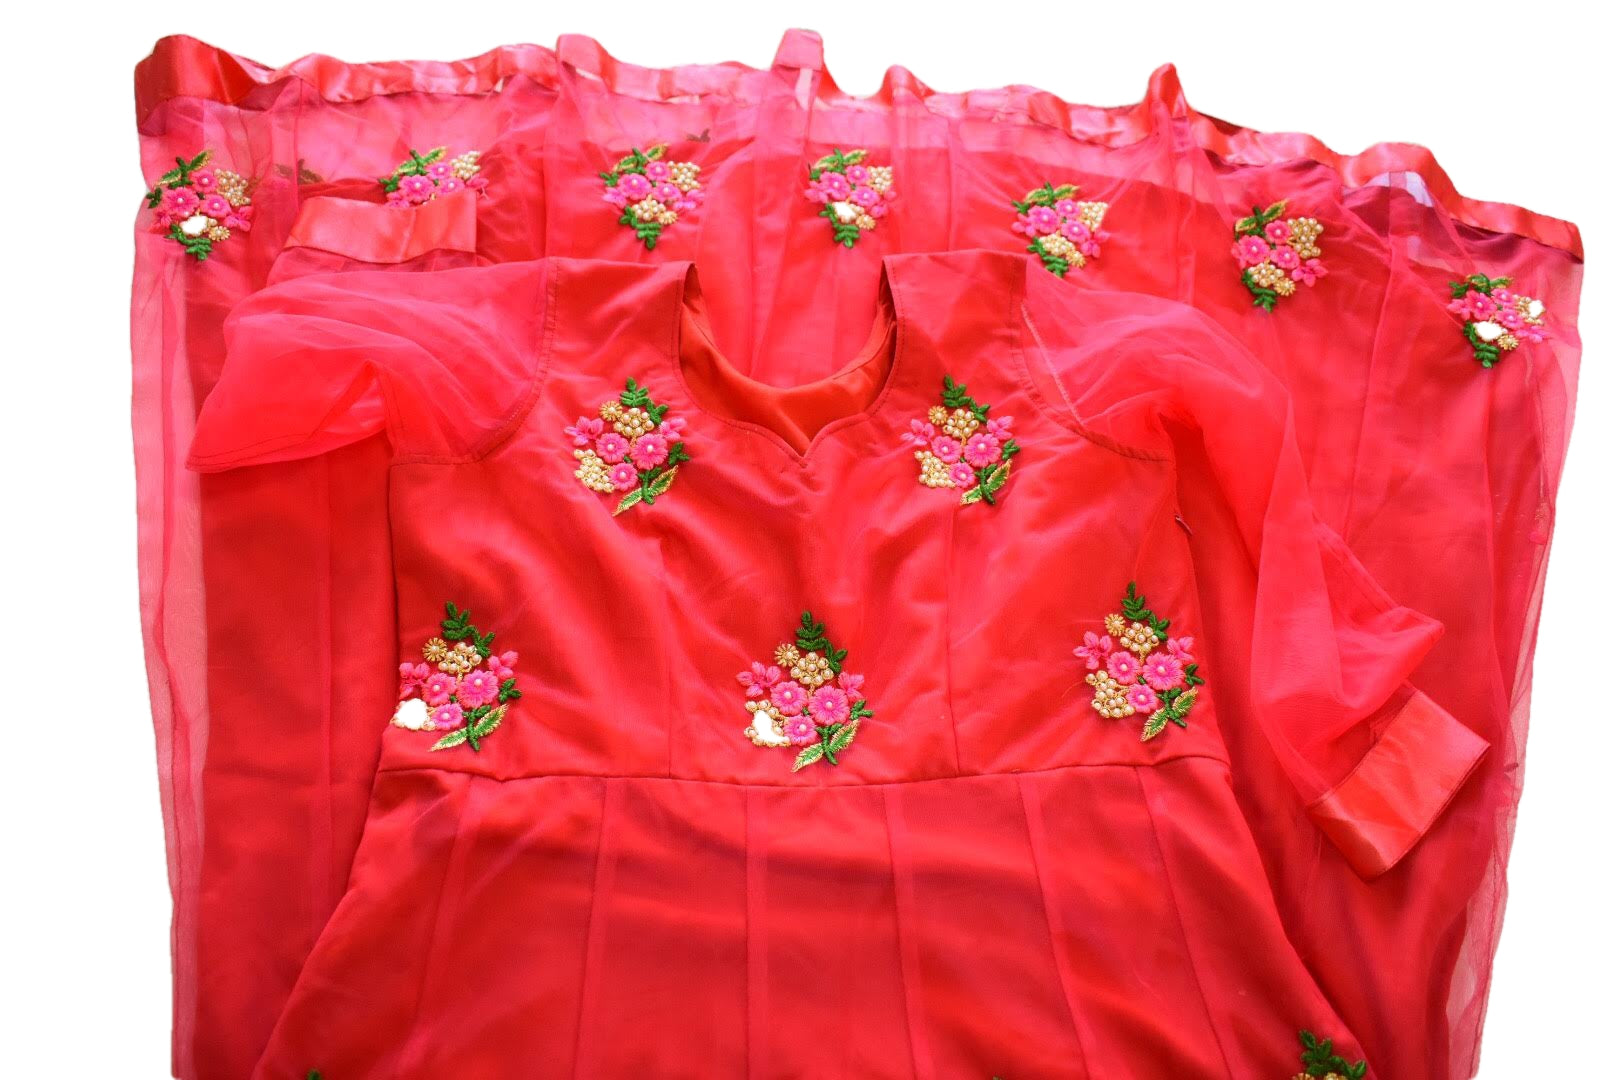 Red Pink Color - Chiffon Net- Embroidered Floral Pattern - Anarkali Gown Kurti - Junior size. Big Girls size - 18 plus